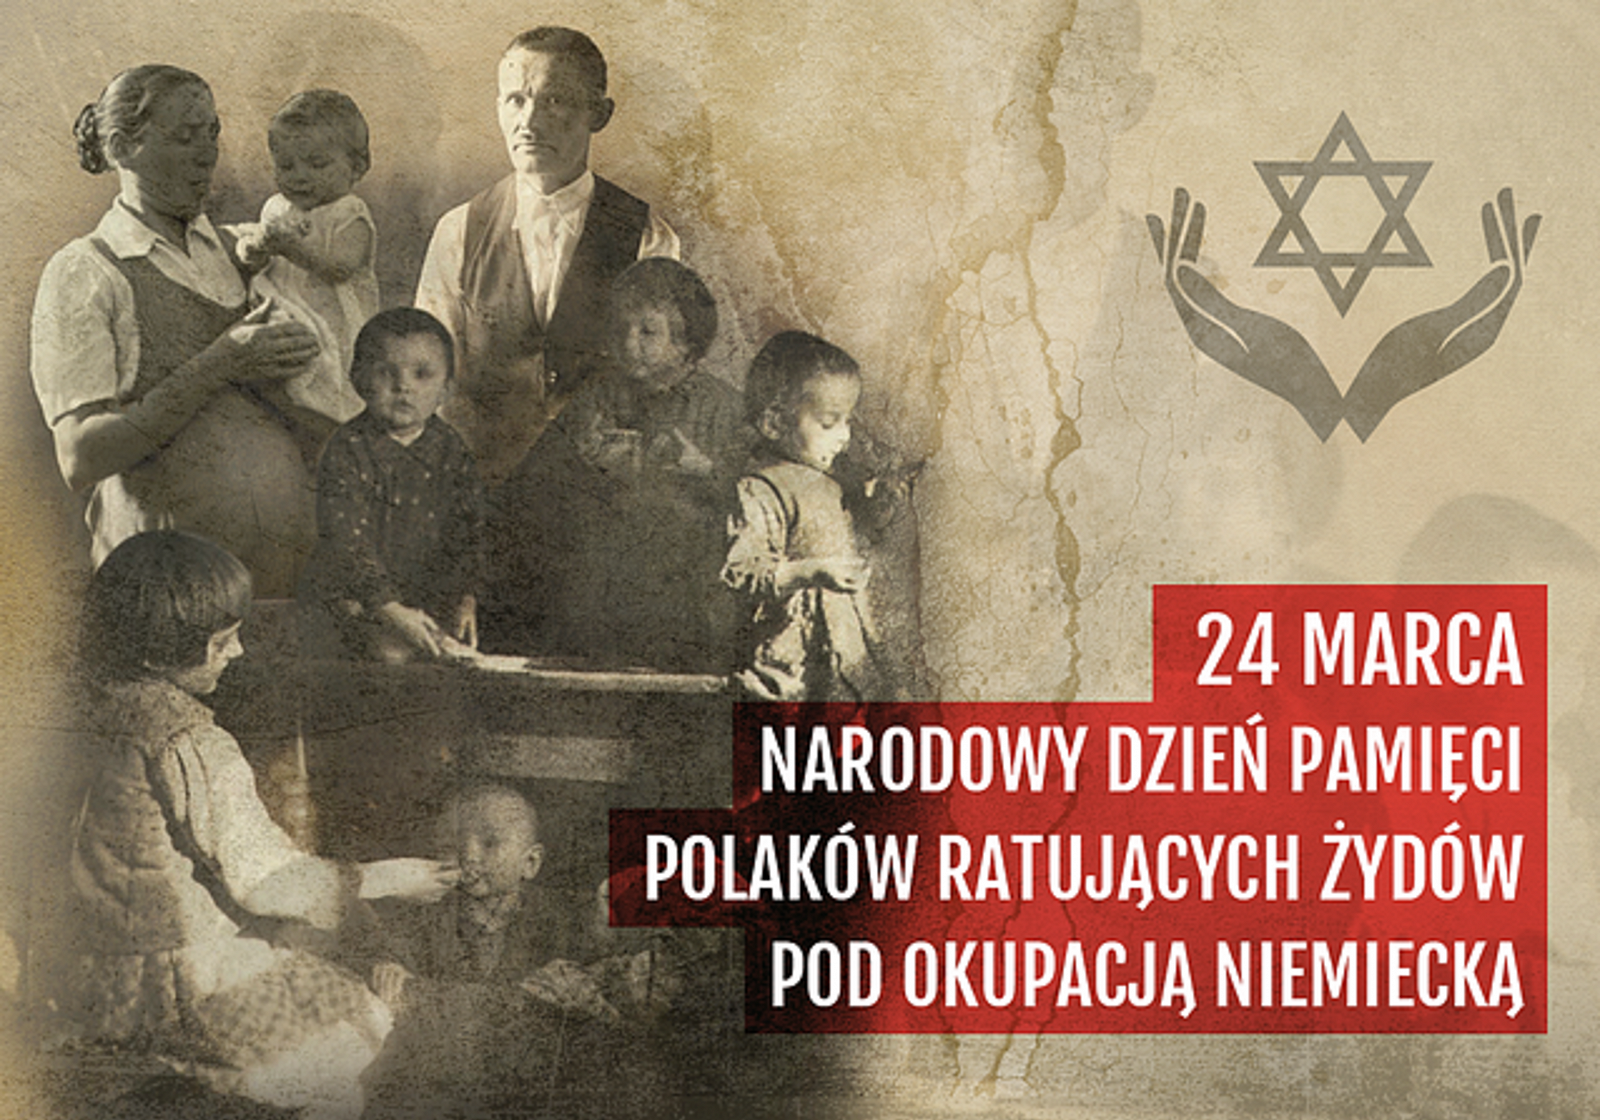 National Day of Remembrance for Poles who rescued Jews under German occupation. 24.03.2023